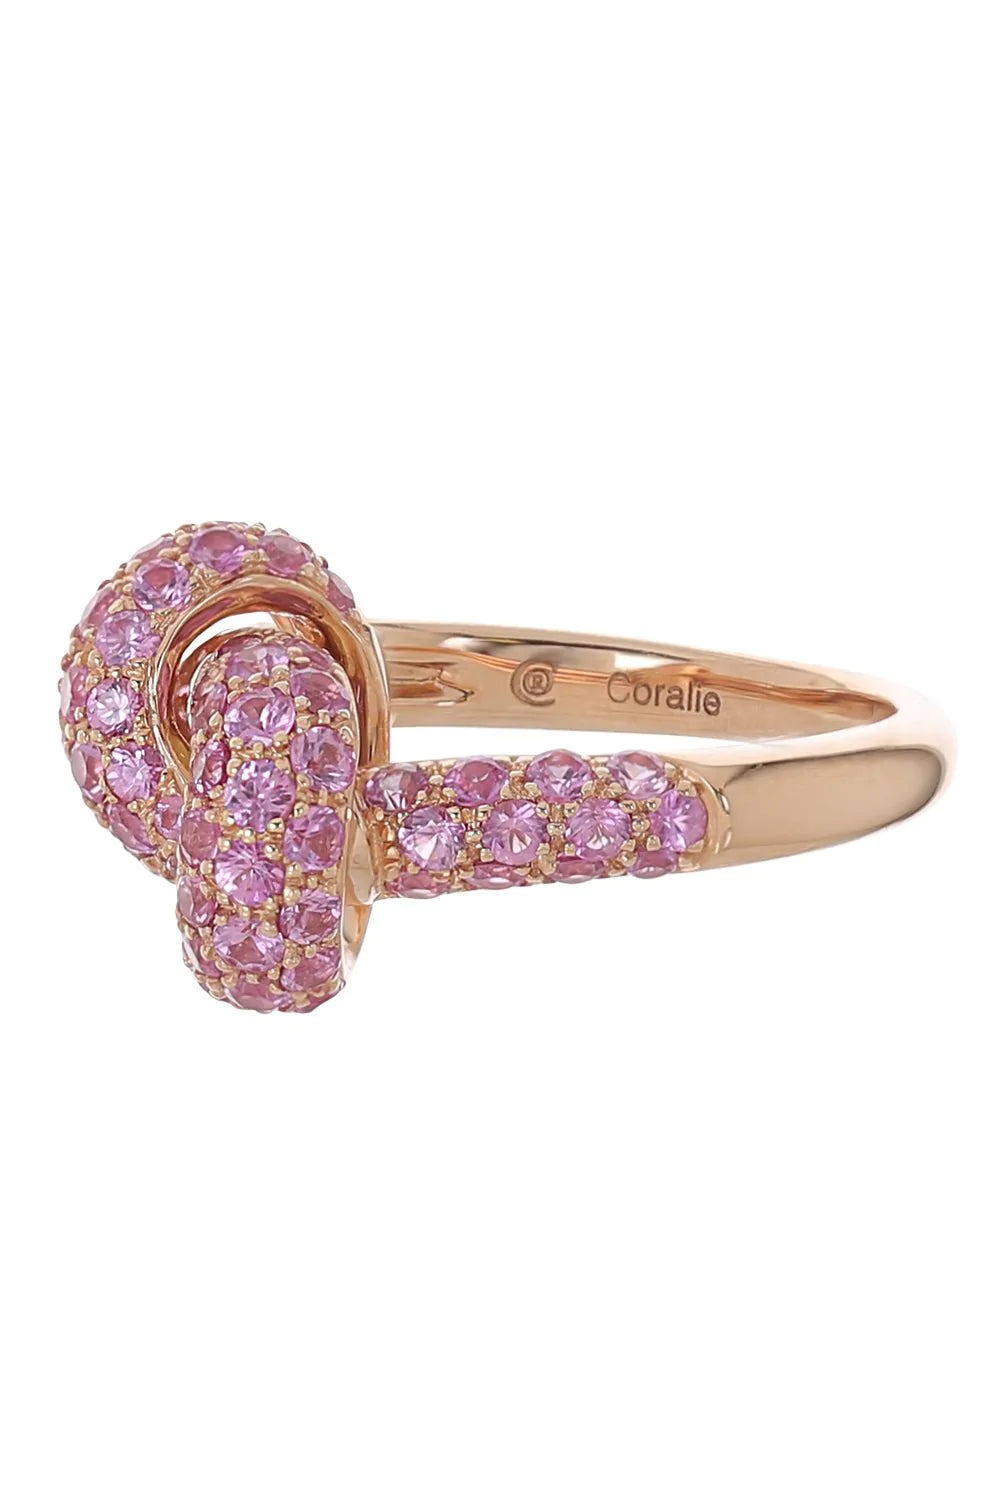 THE LOVE KNOT BY CORALIE-Pink Sapphire Knot Ring-ROSE GOLD